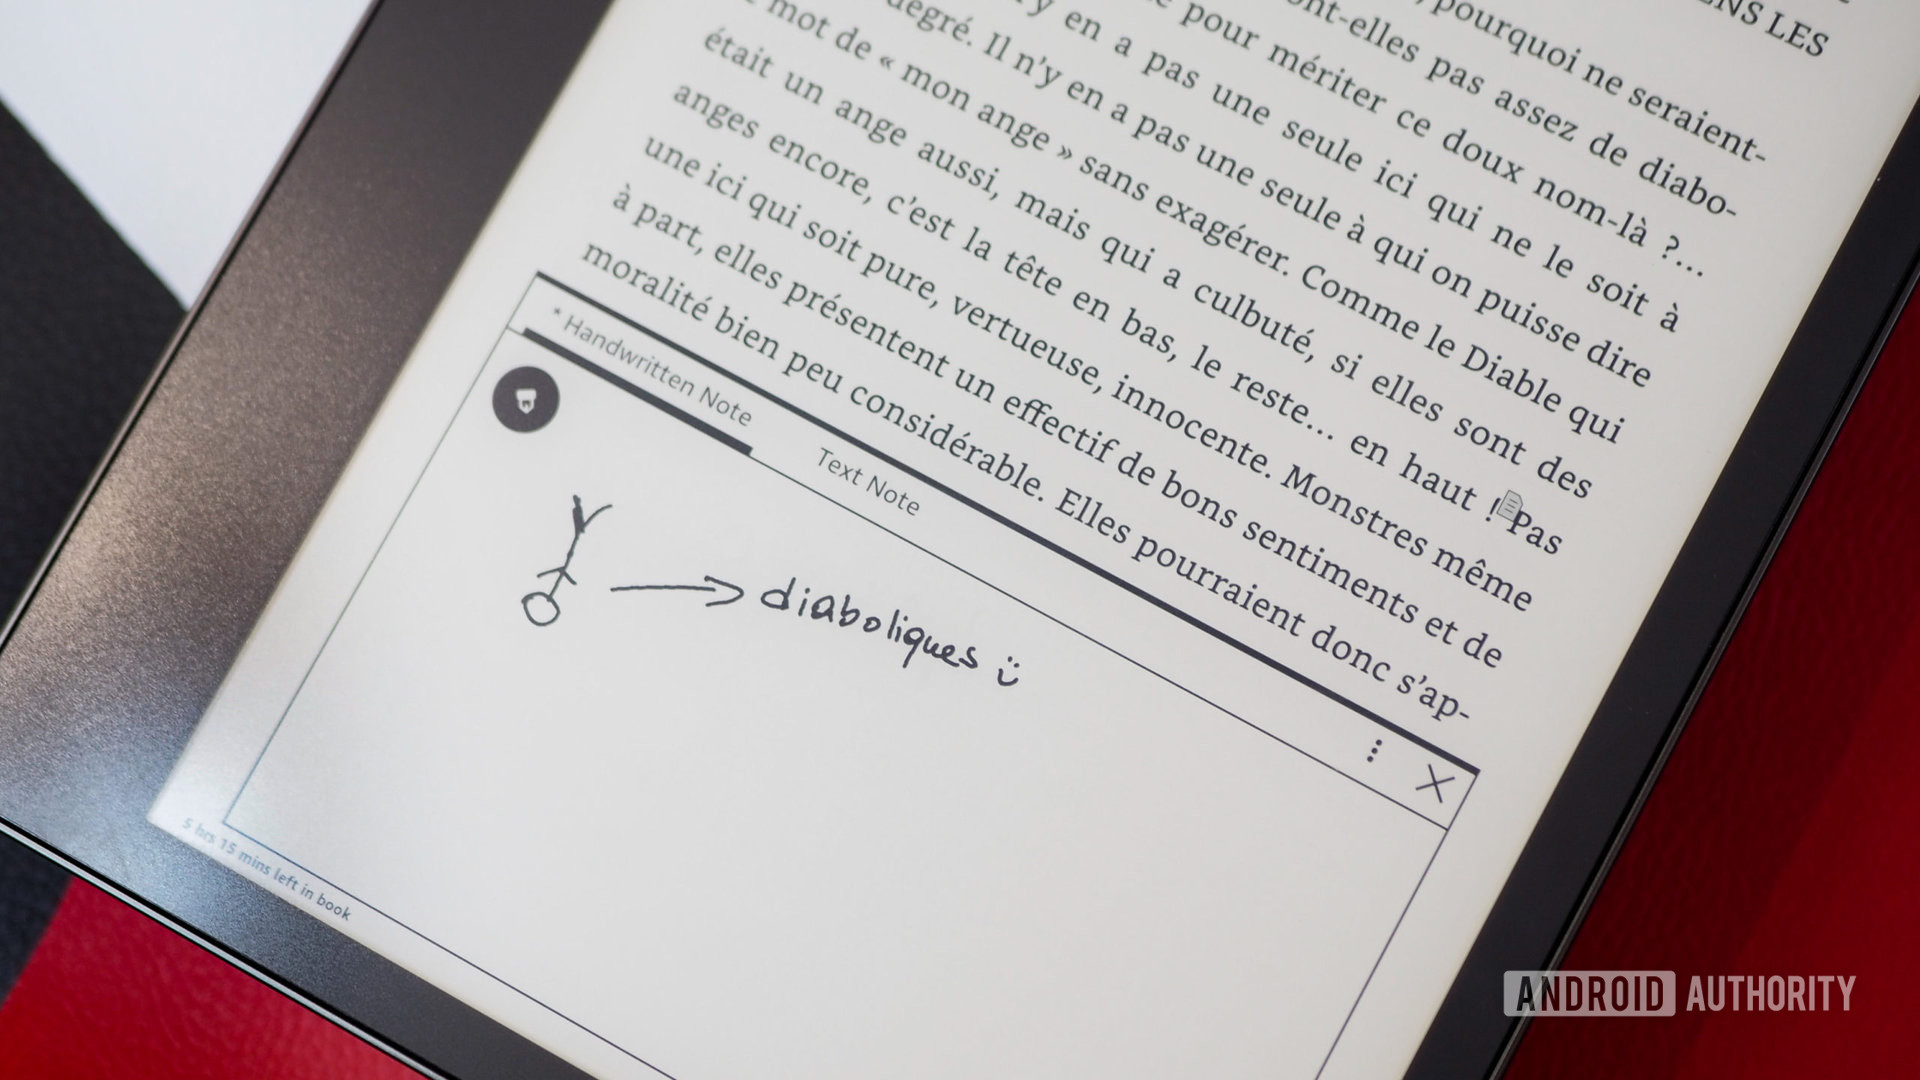 Amazon Kindle Scribe's handwritten sticky note on an EPUB book